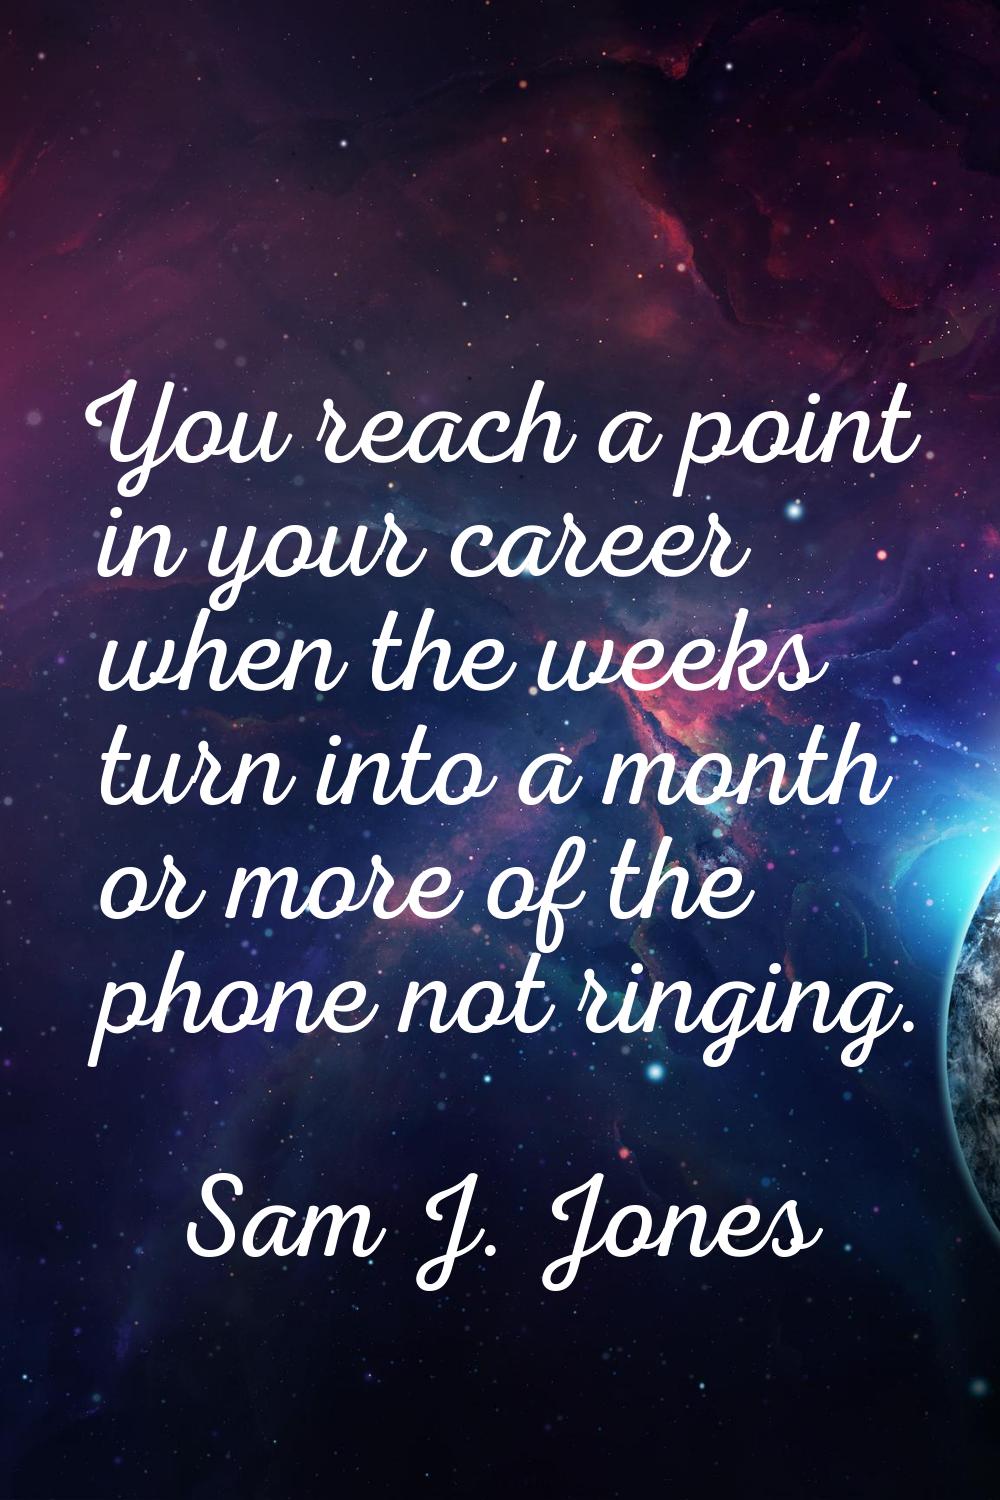 You reach a point in your career when the weeks turn into a month or more of the phone not ringing.